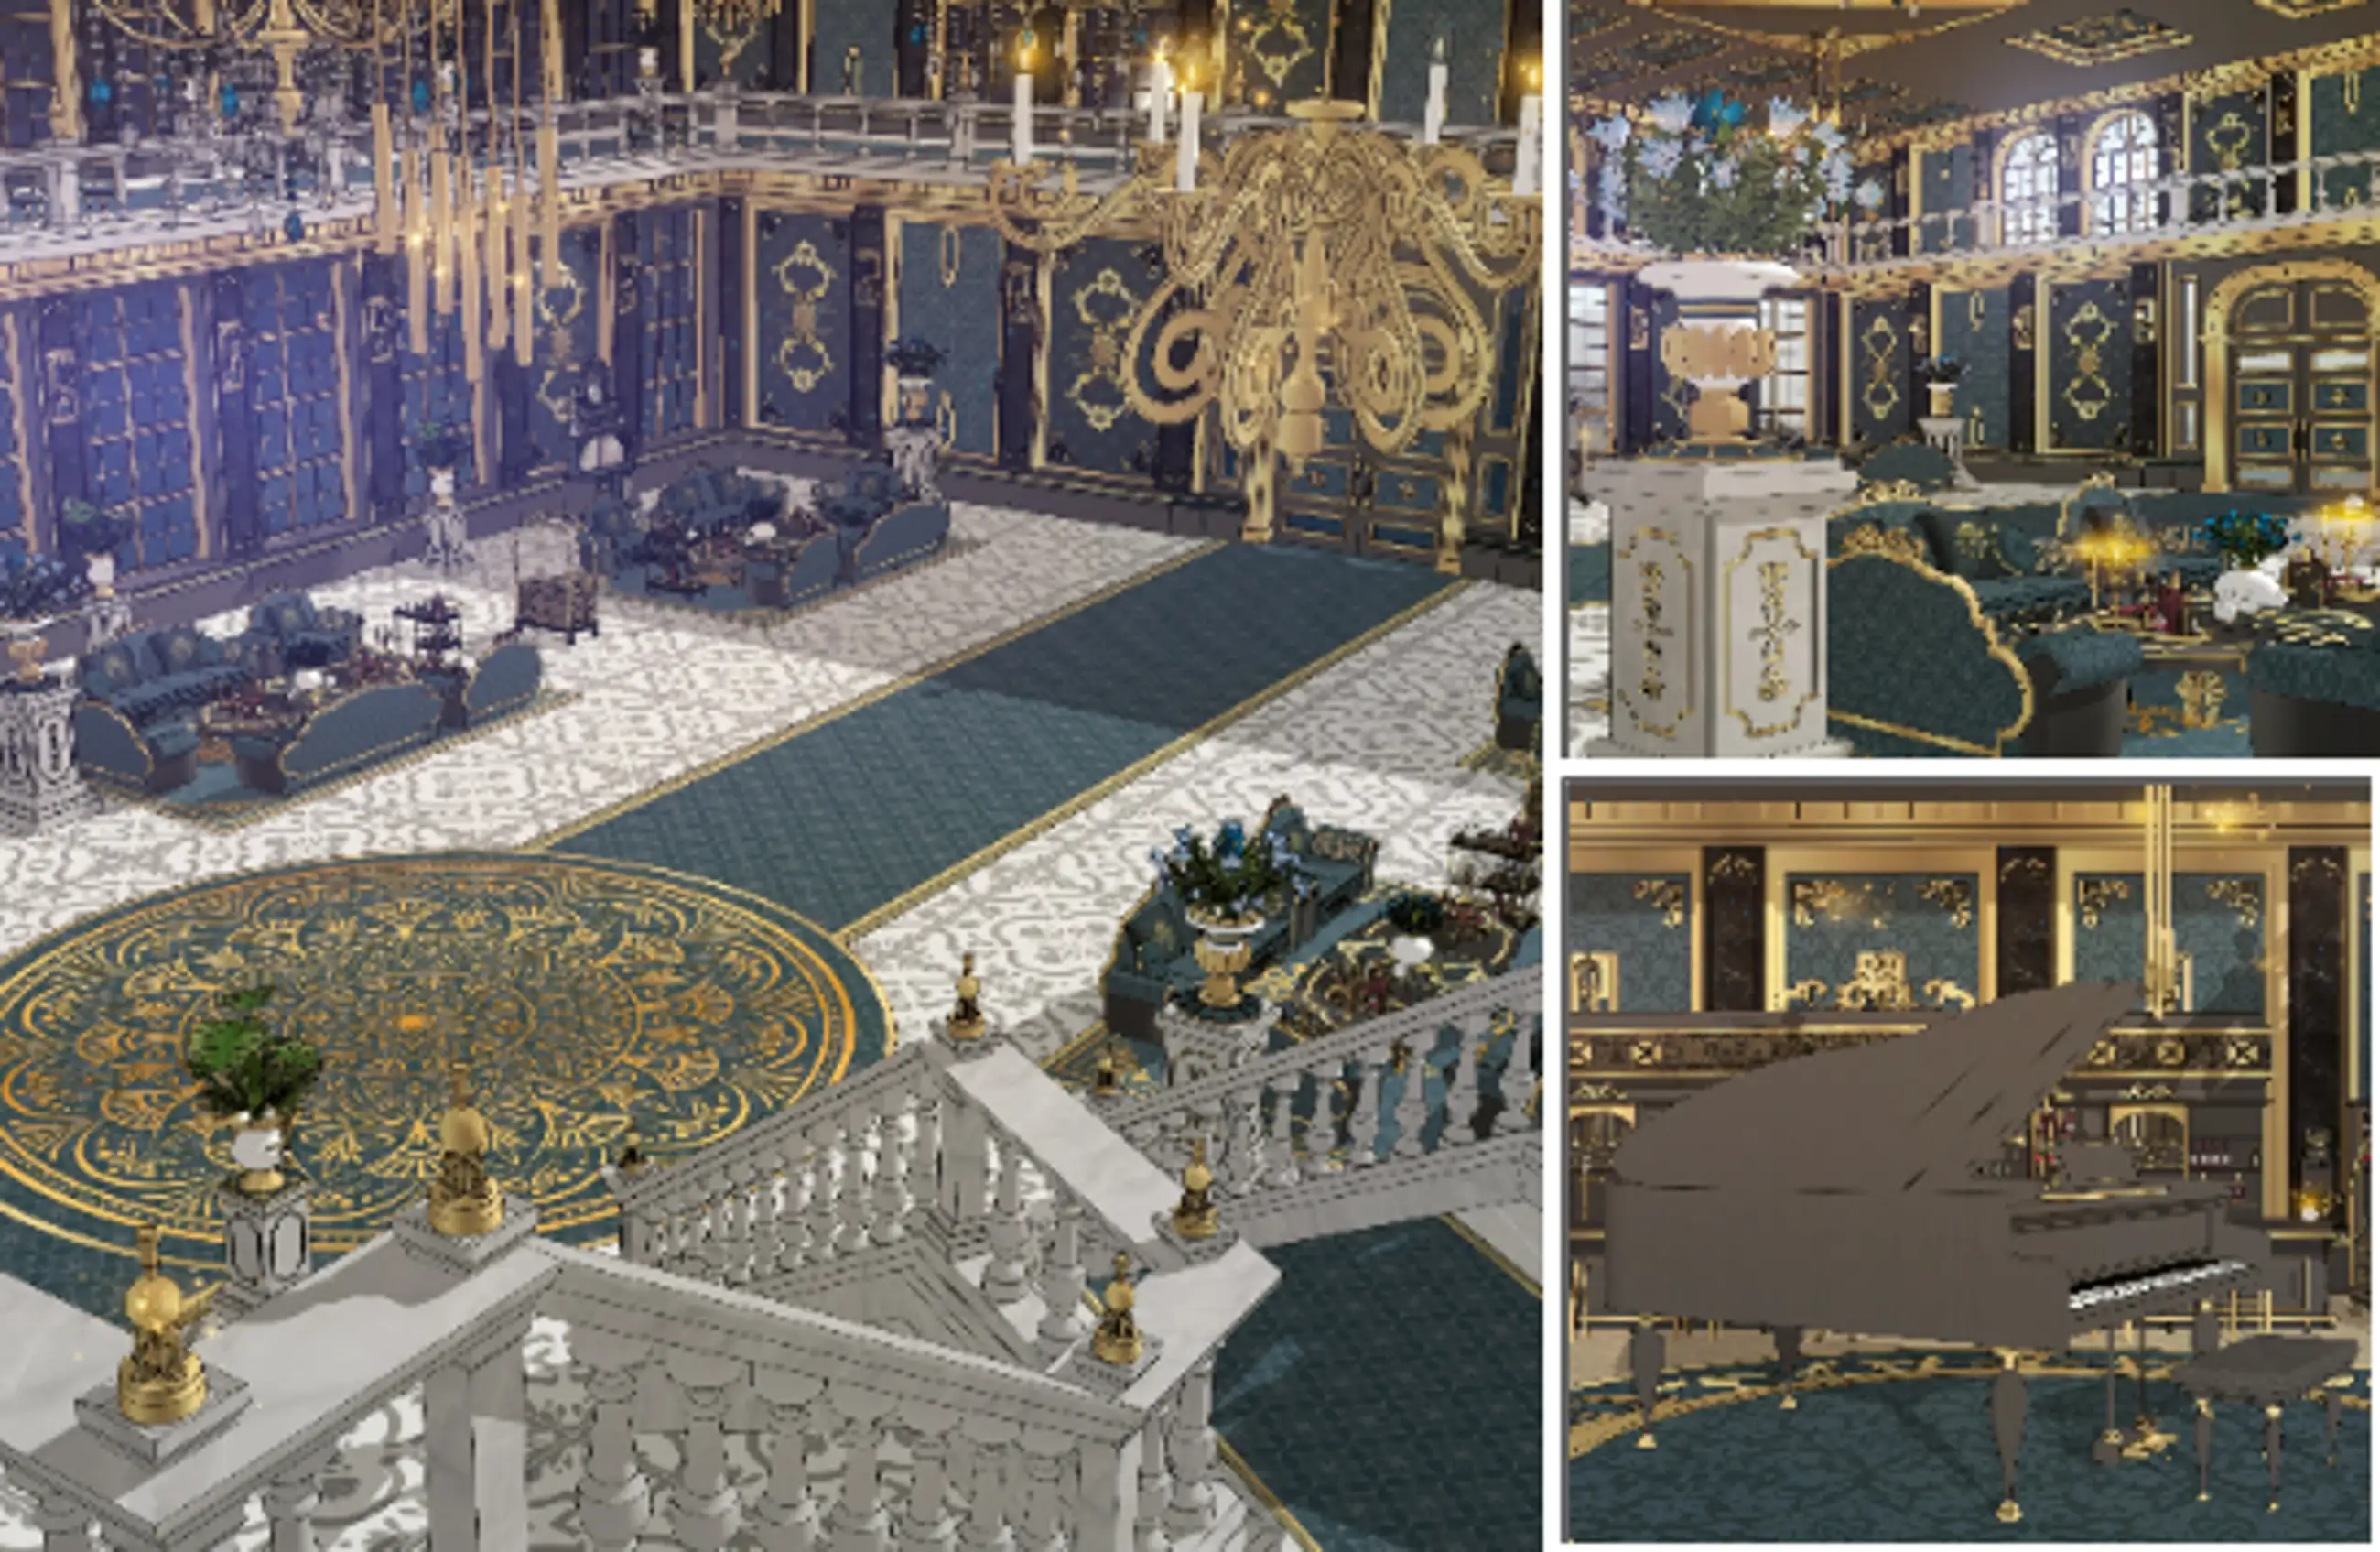 Black & Gold Lofan mansion that reminds me more and more - lobby